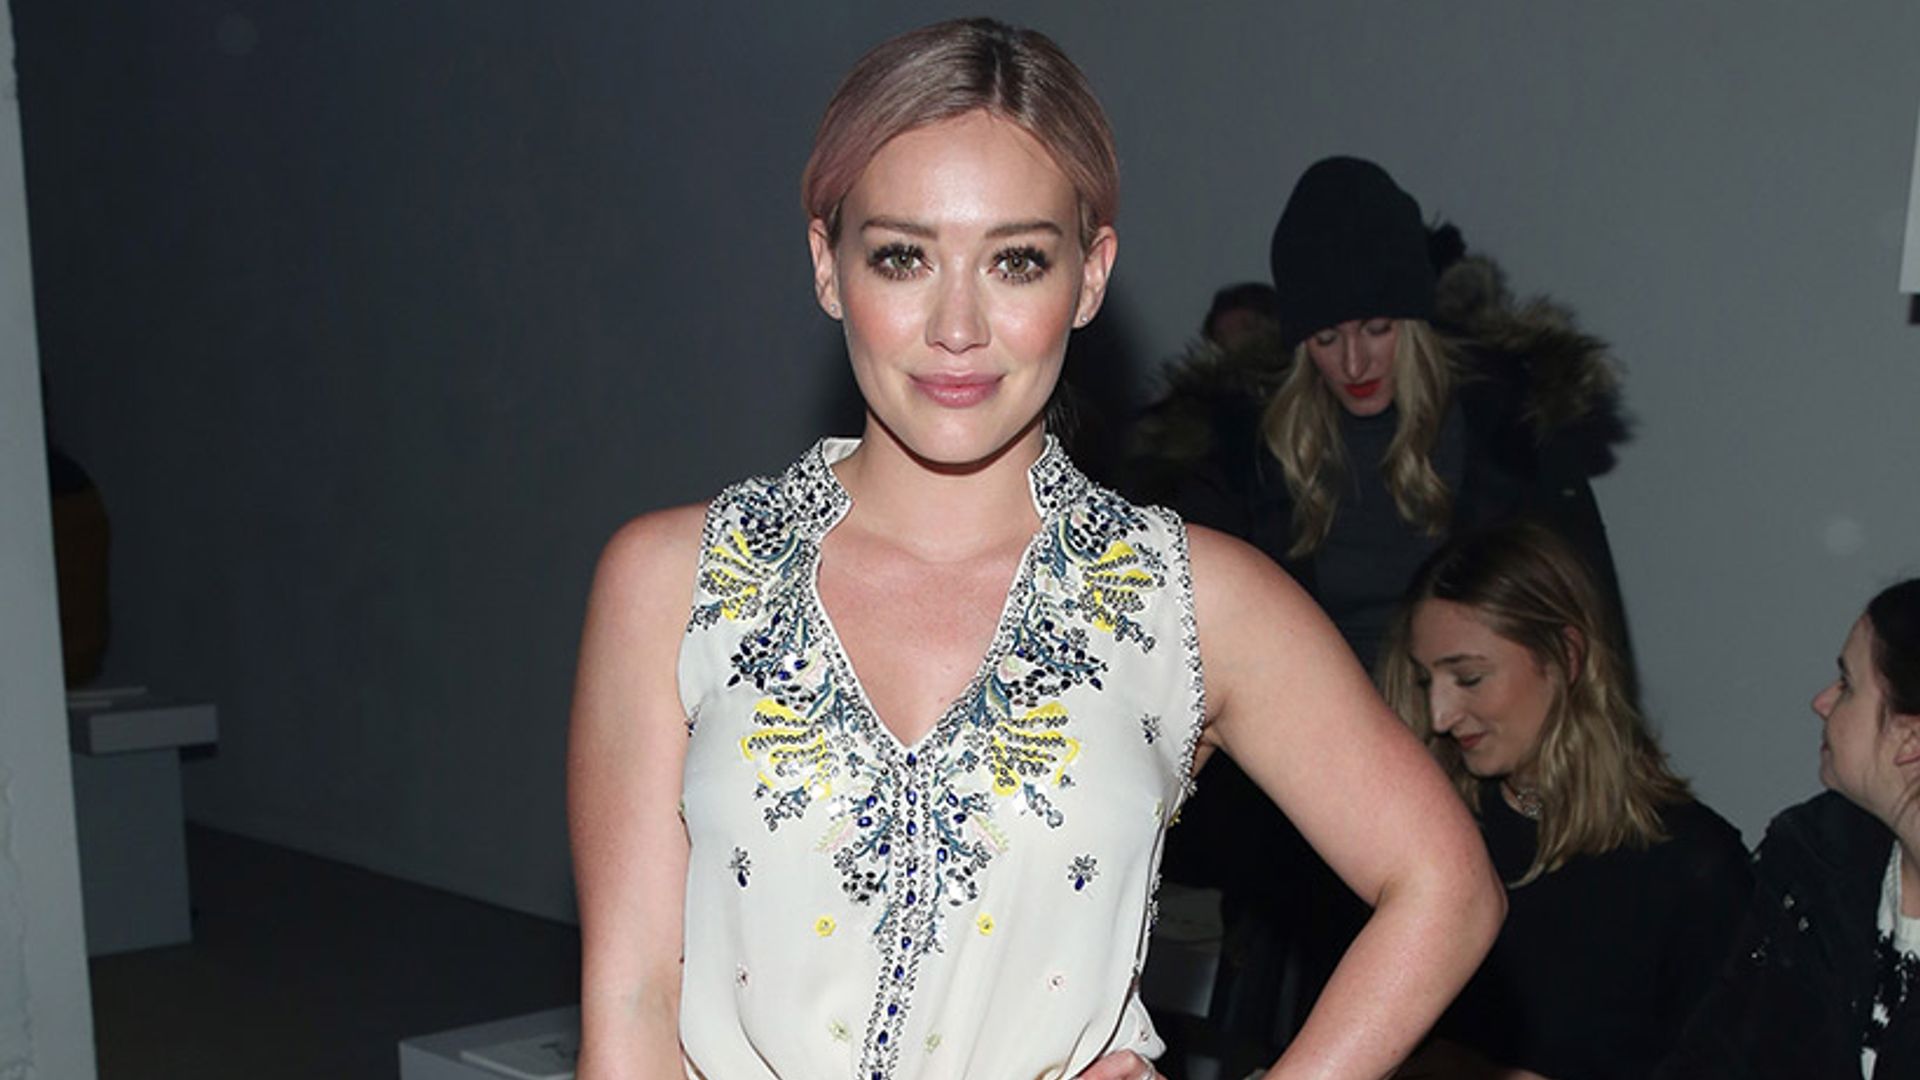 Hilary Duff inspires fans as she embraces her post-baby bikini body